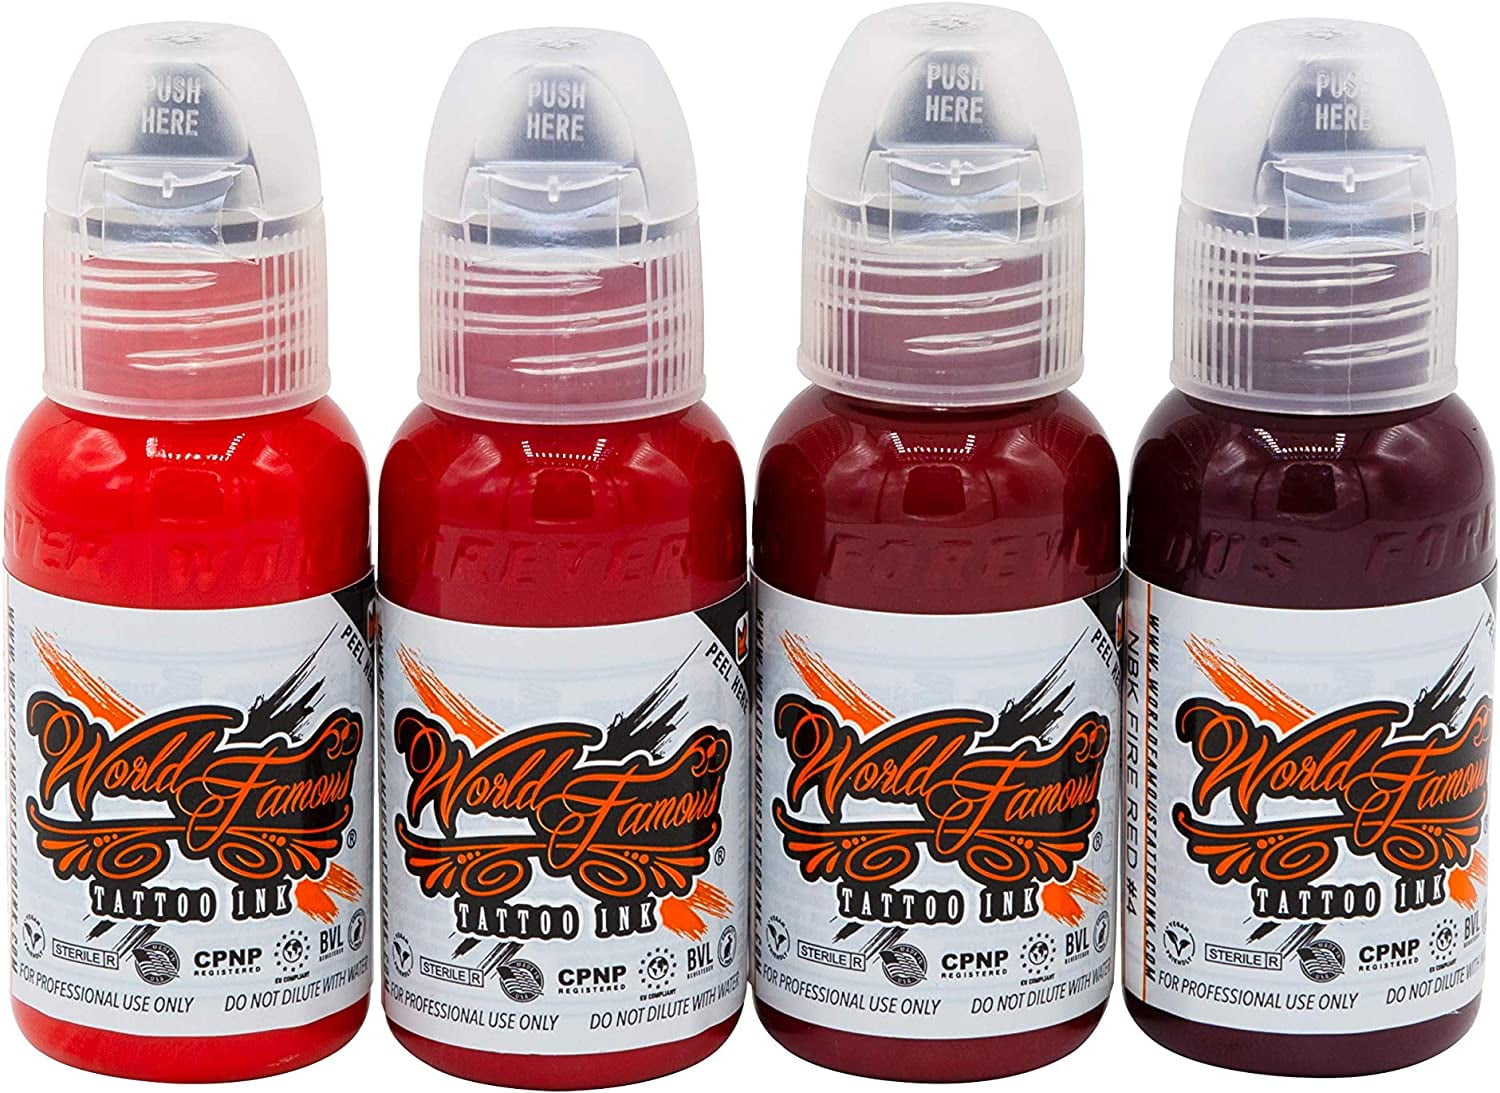 World Famous Red Set Tattoo Ink Vegan and Professional Ink Made in USA  NBK Fire Red Set  1oz  Walmartcom